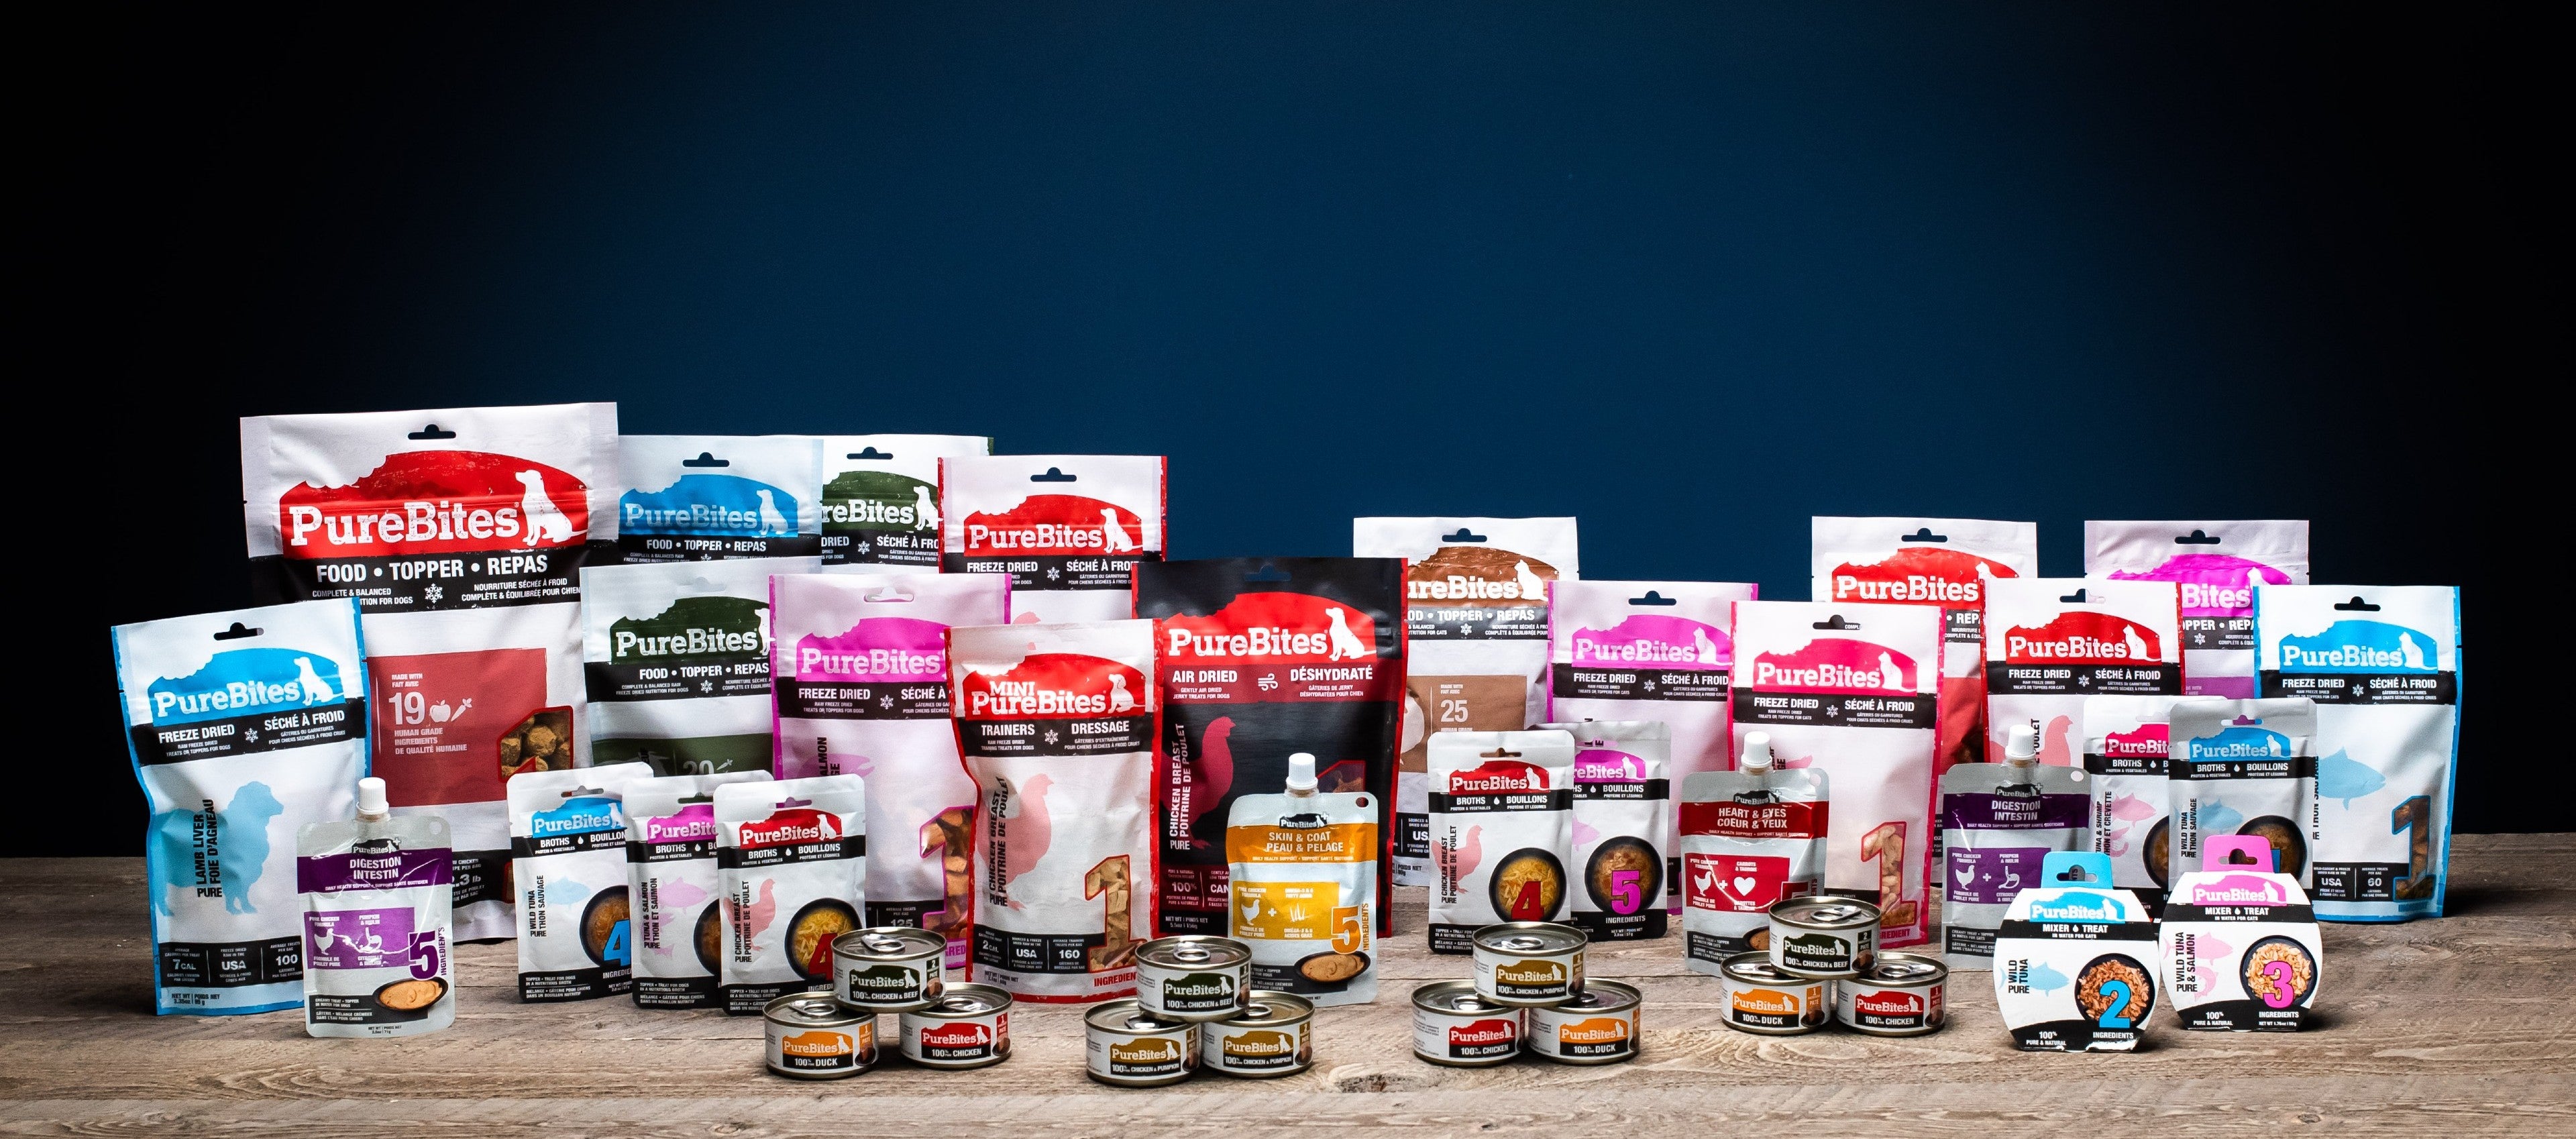 The full assortment of PureBites products